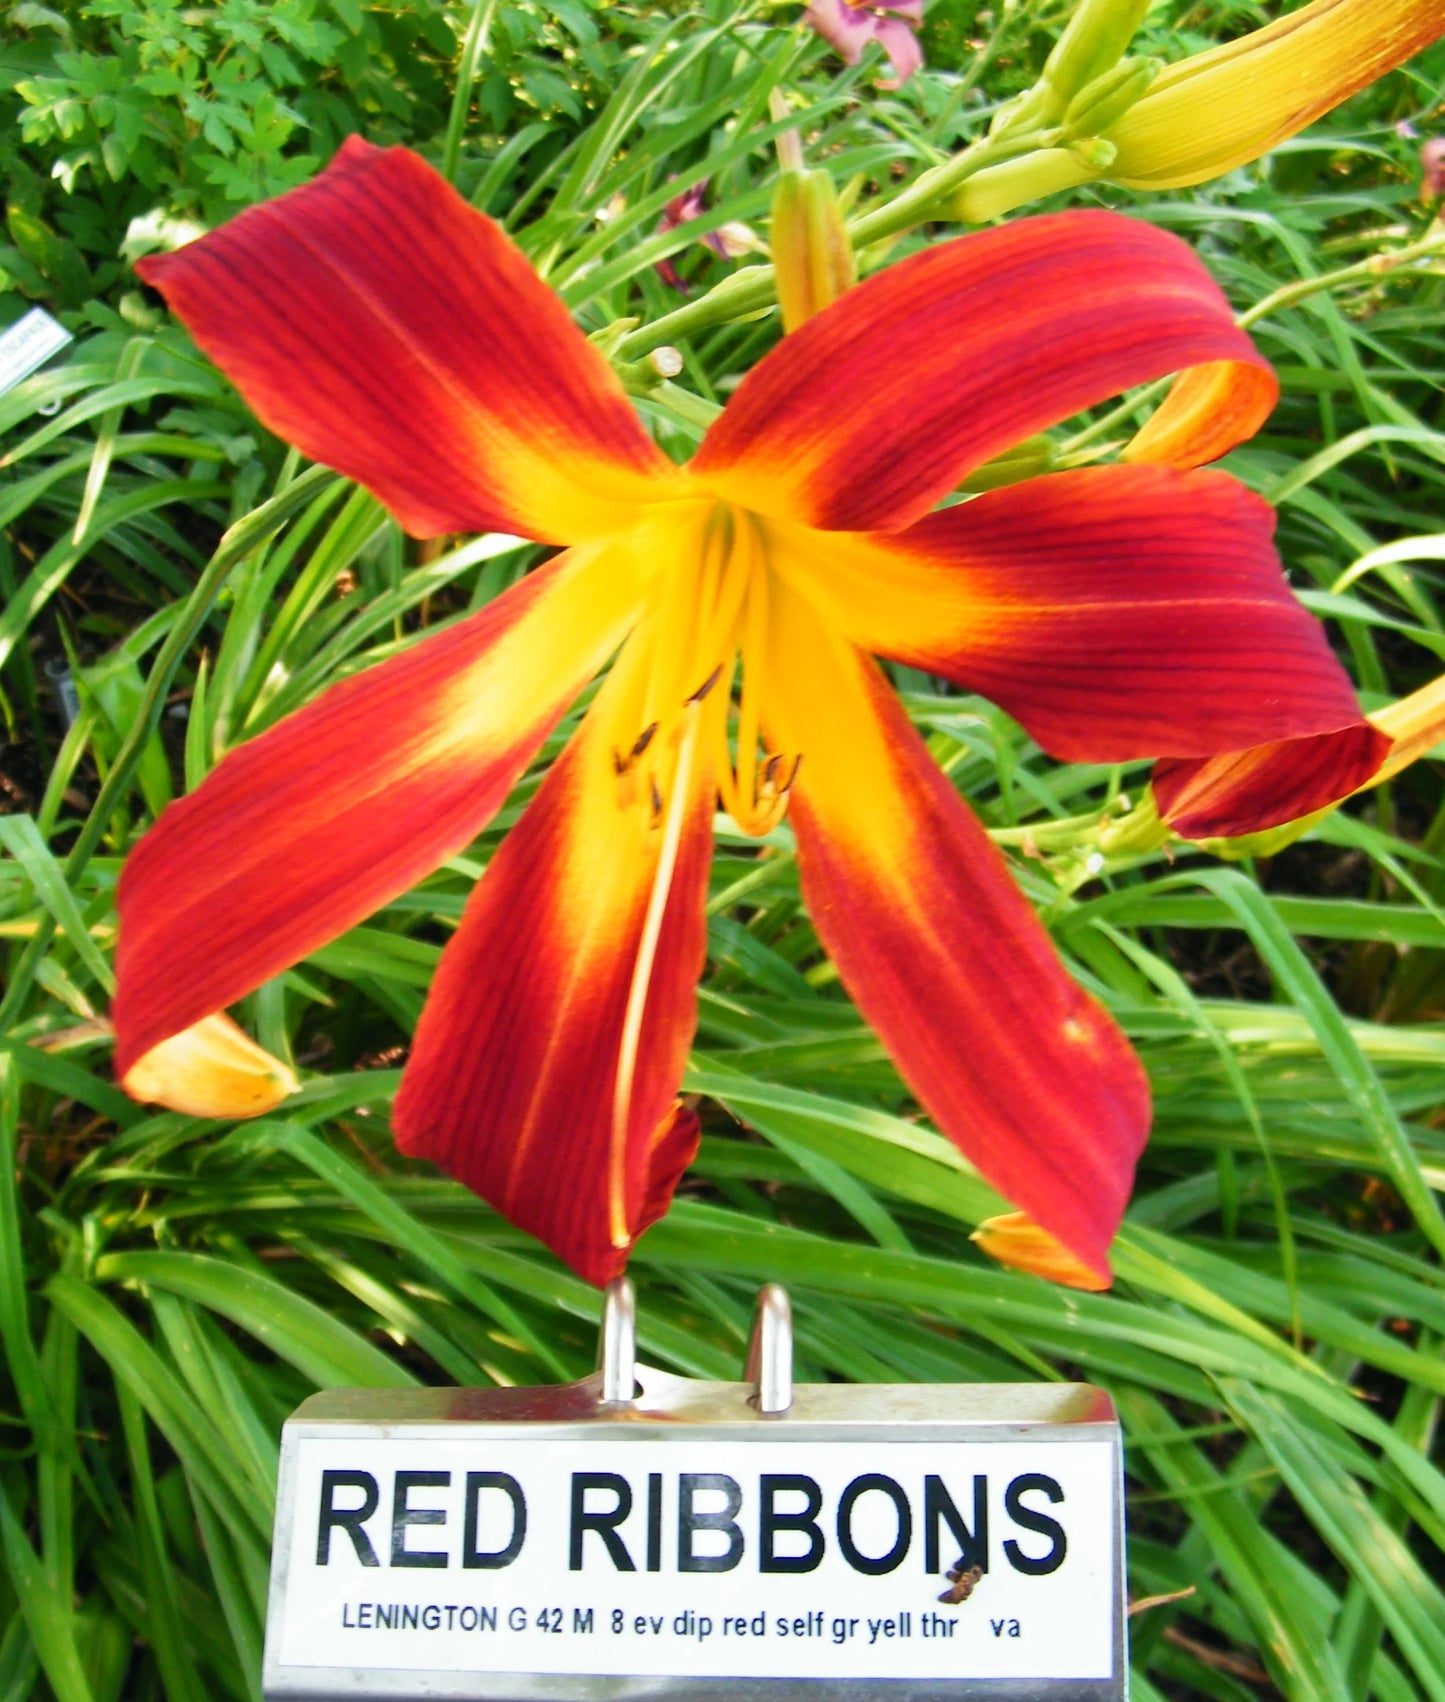 RED RIBBONS